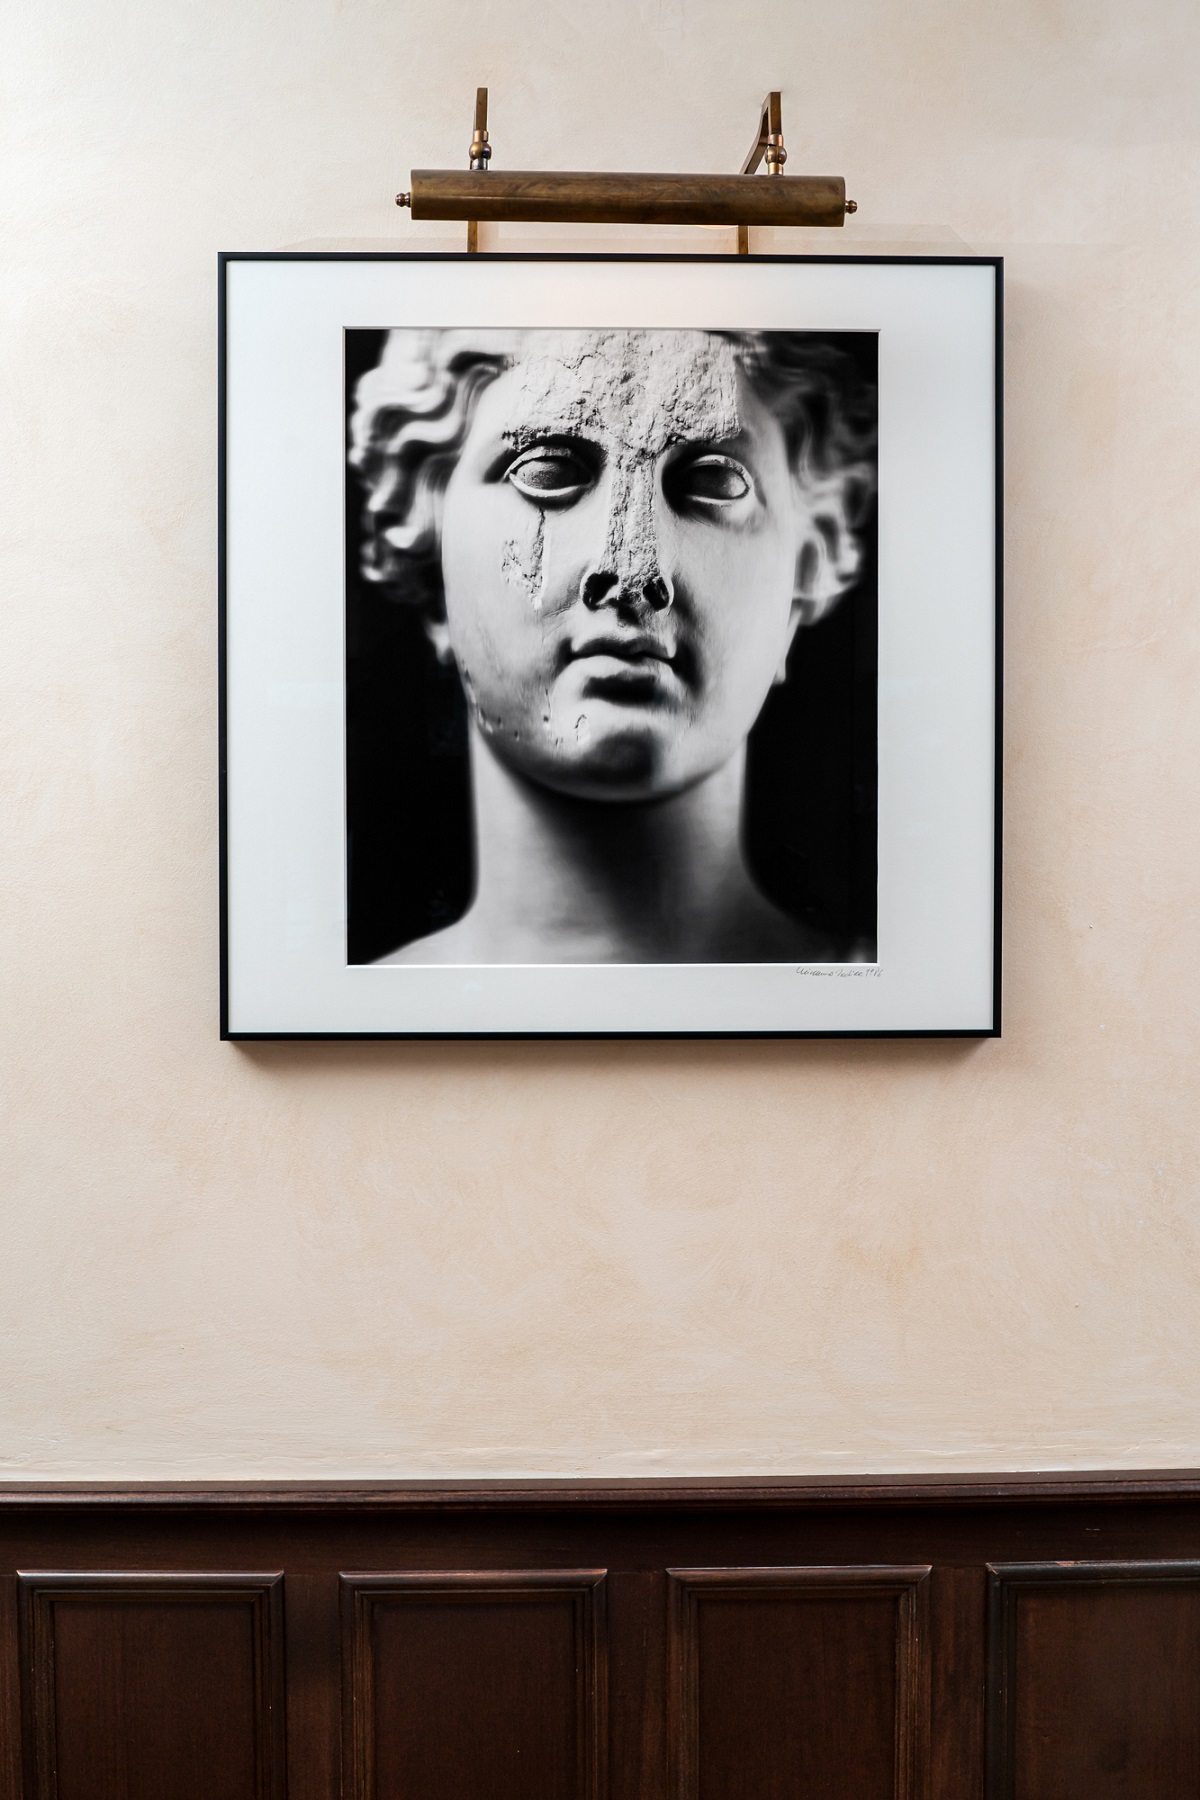 Mimmo Jodice image in black and white on the walls in Belmonds Grand Hotel Timeo